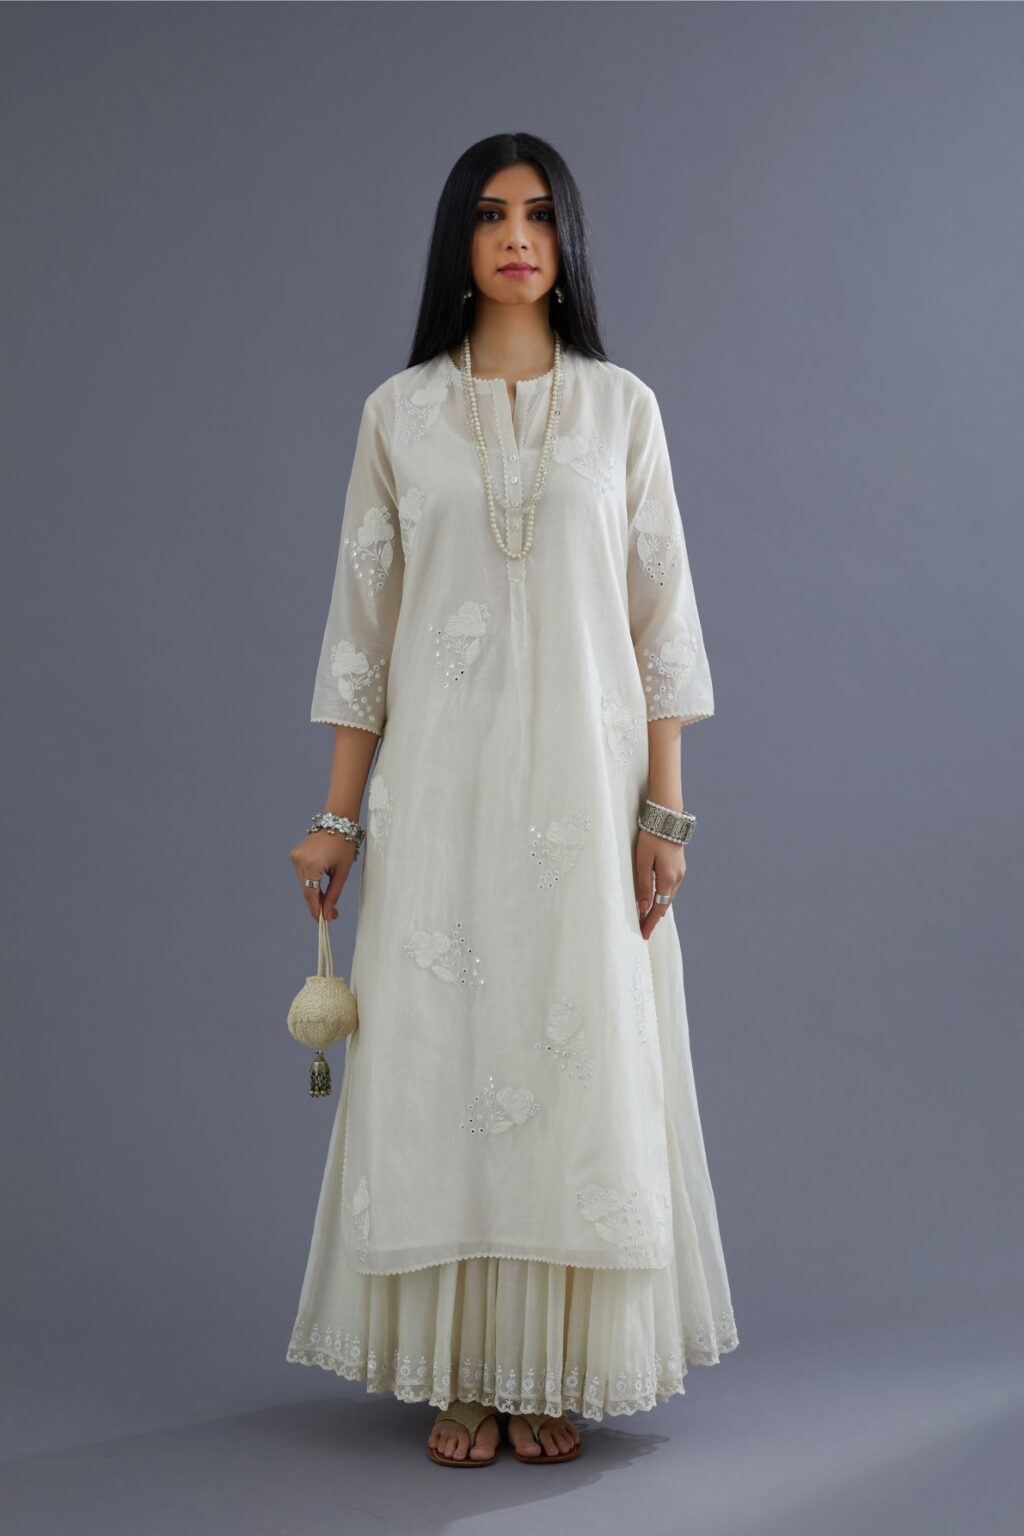 Off white silk chanderi kurta set with applique flower embroidery and lace detailing at neck and side slits